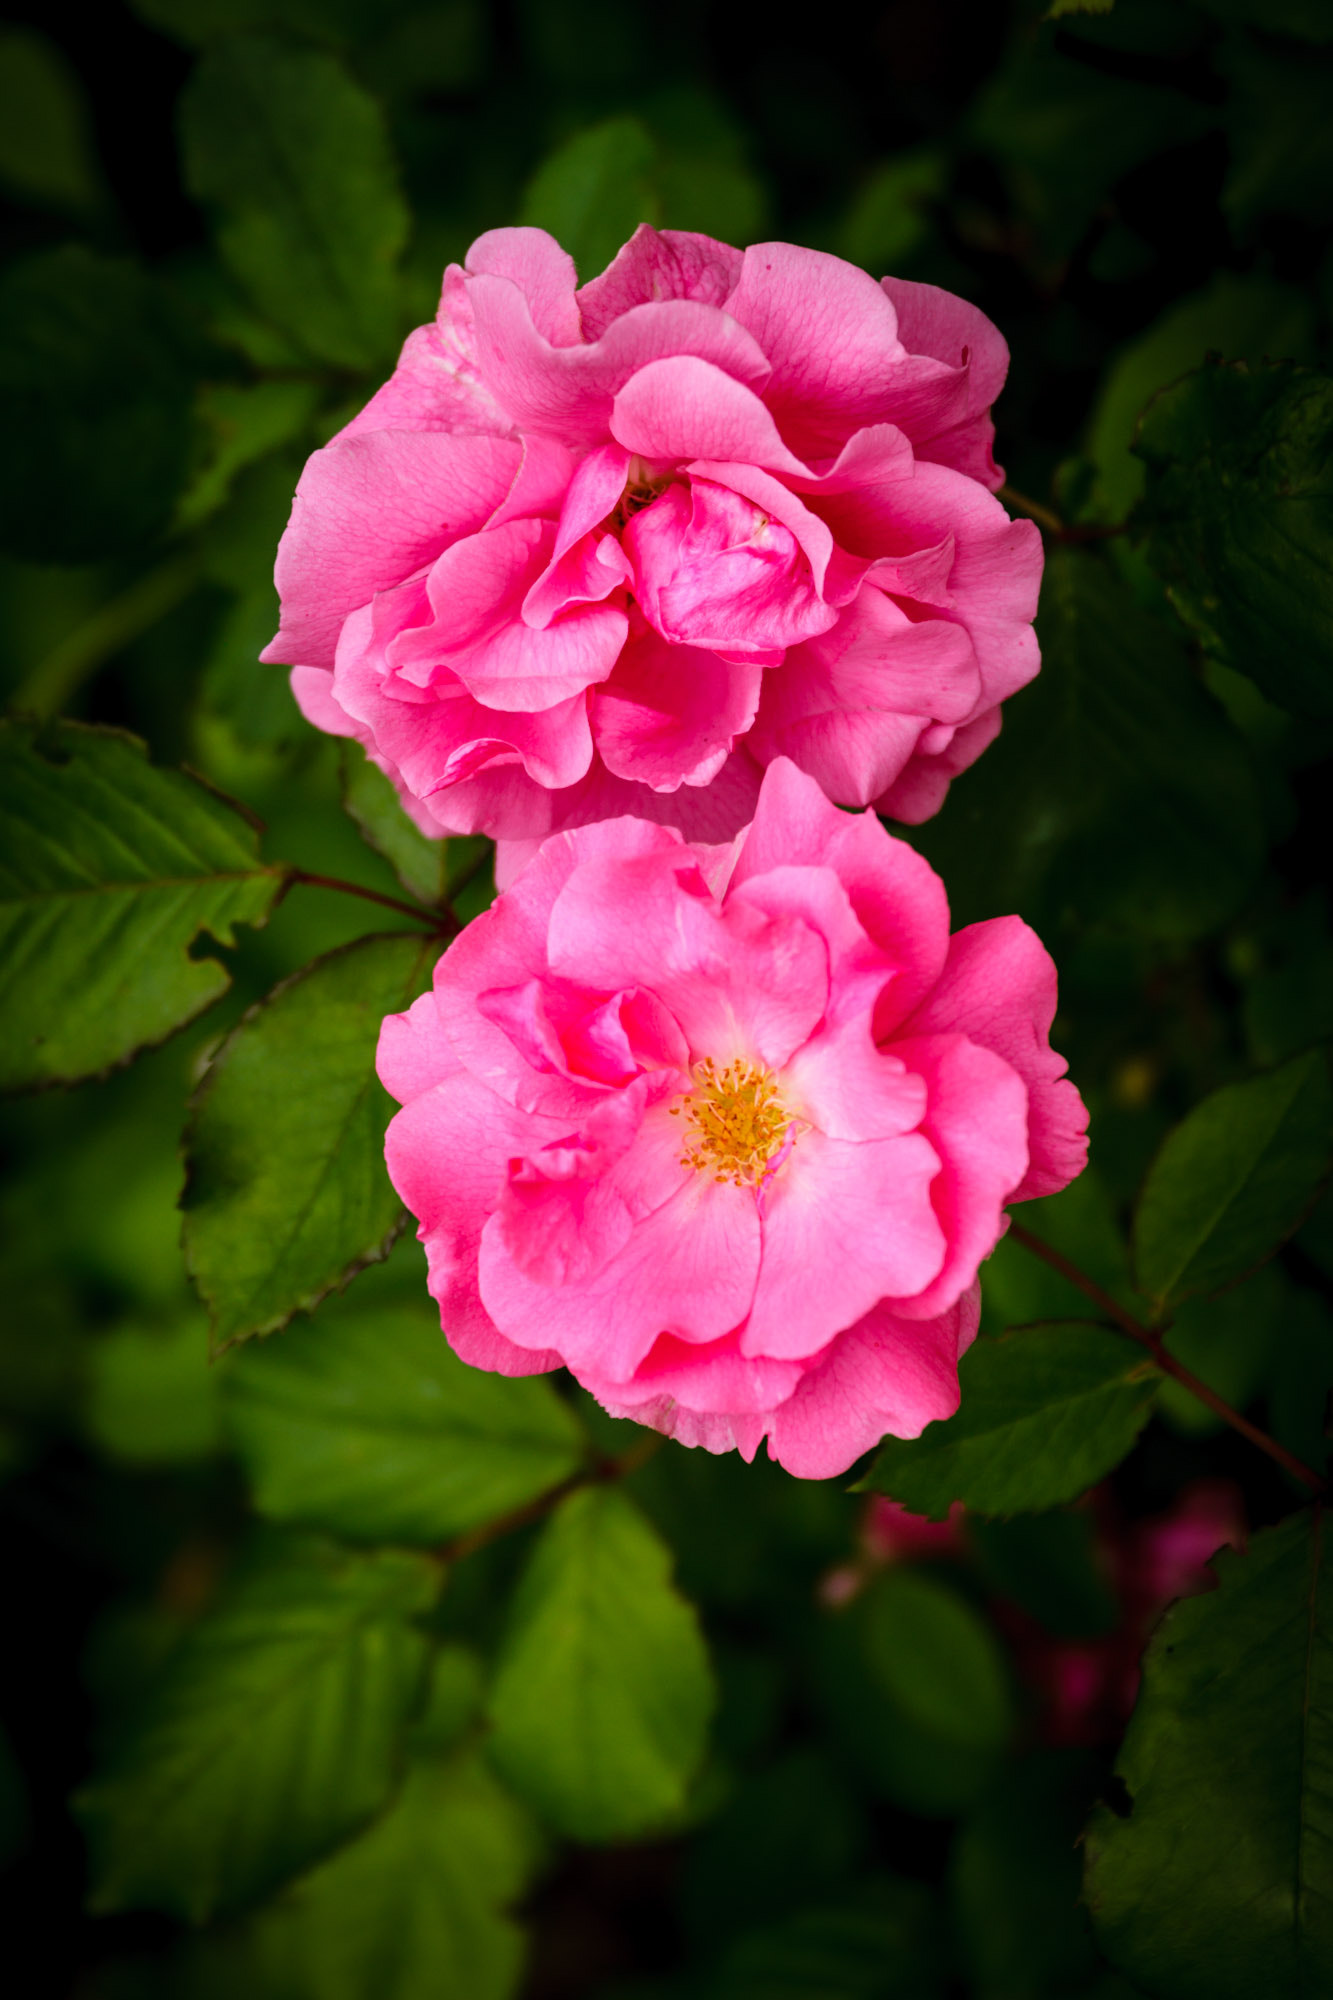 Canon EOS 7D + Sigma 24-105mm f/4 DG OS HSM | A sample photo. Rose photography